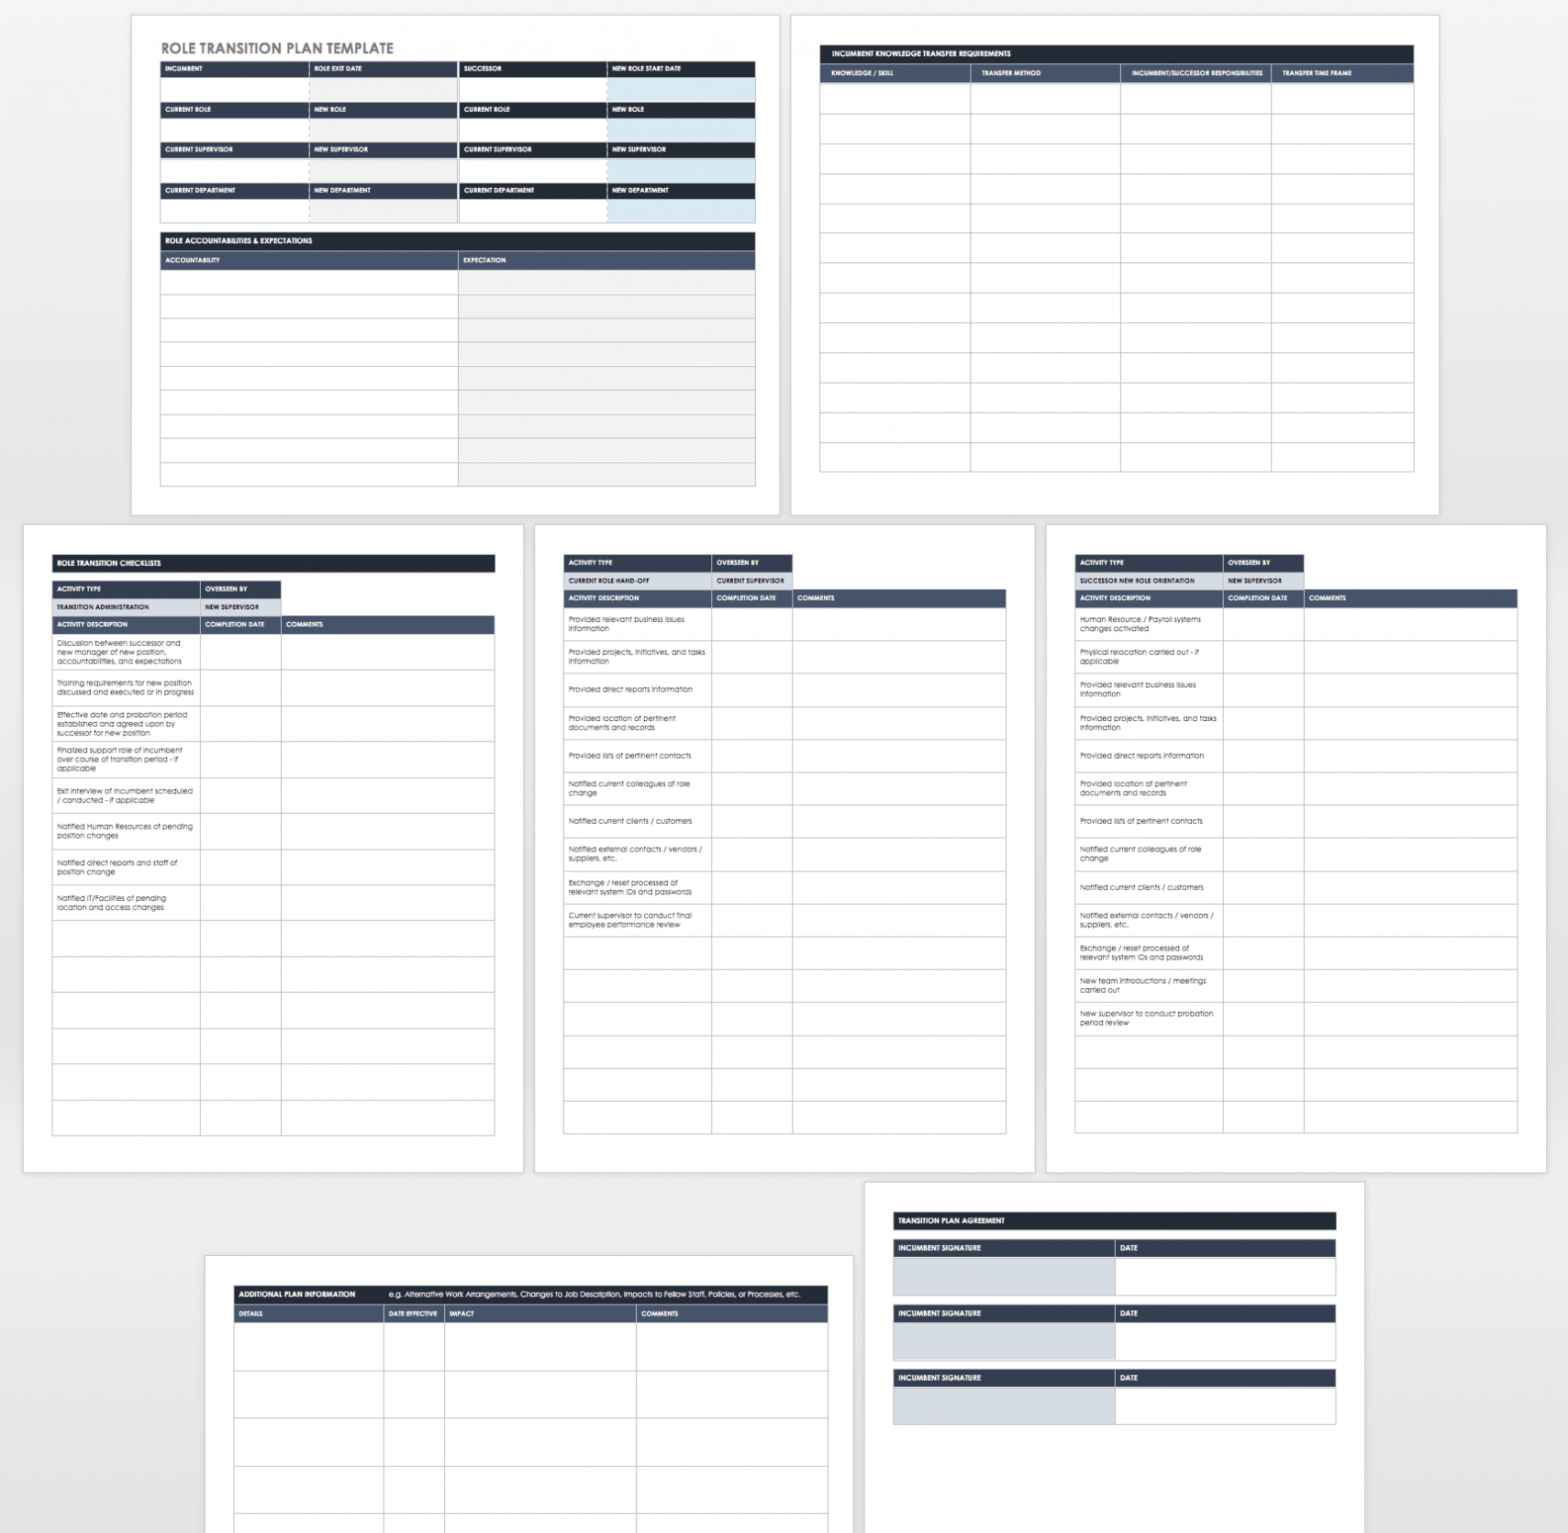 Free Business Transition Plan Templates | Smartsheet with Business Process Transition Plan Template